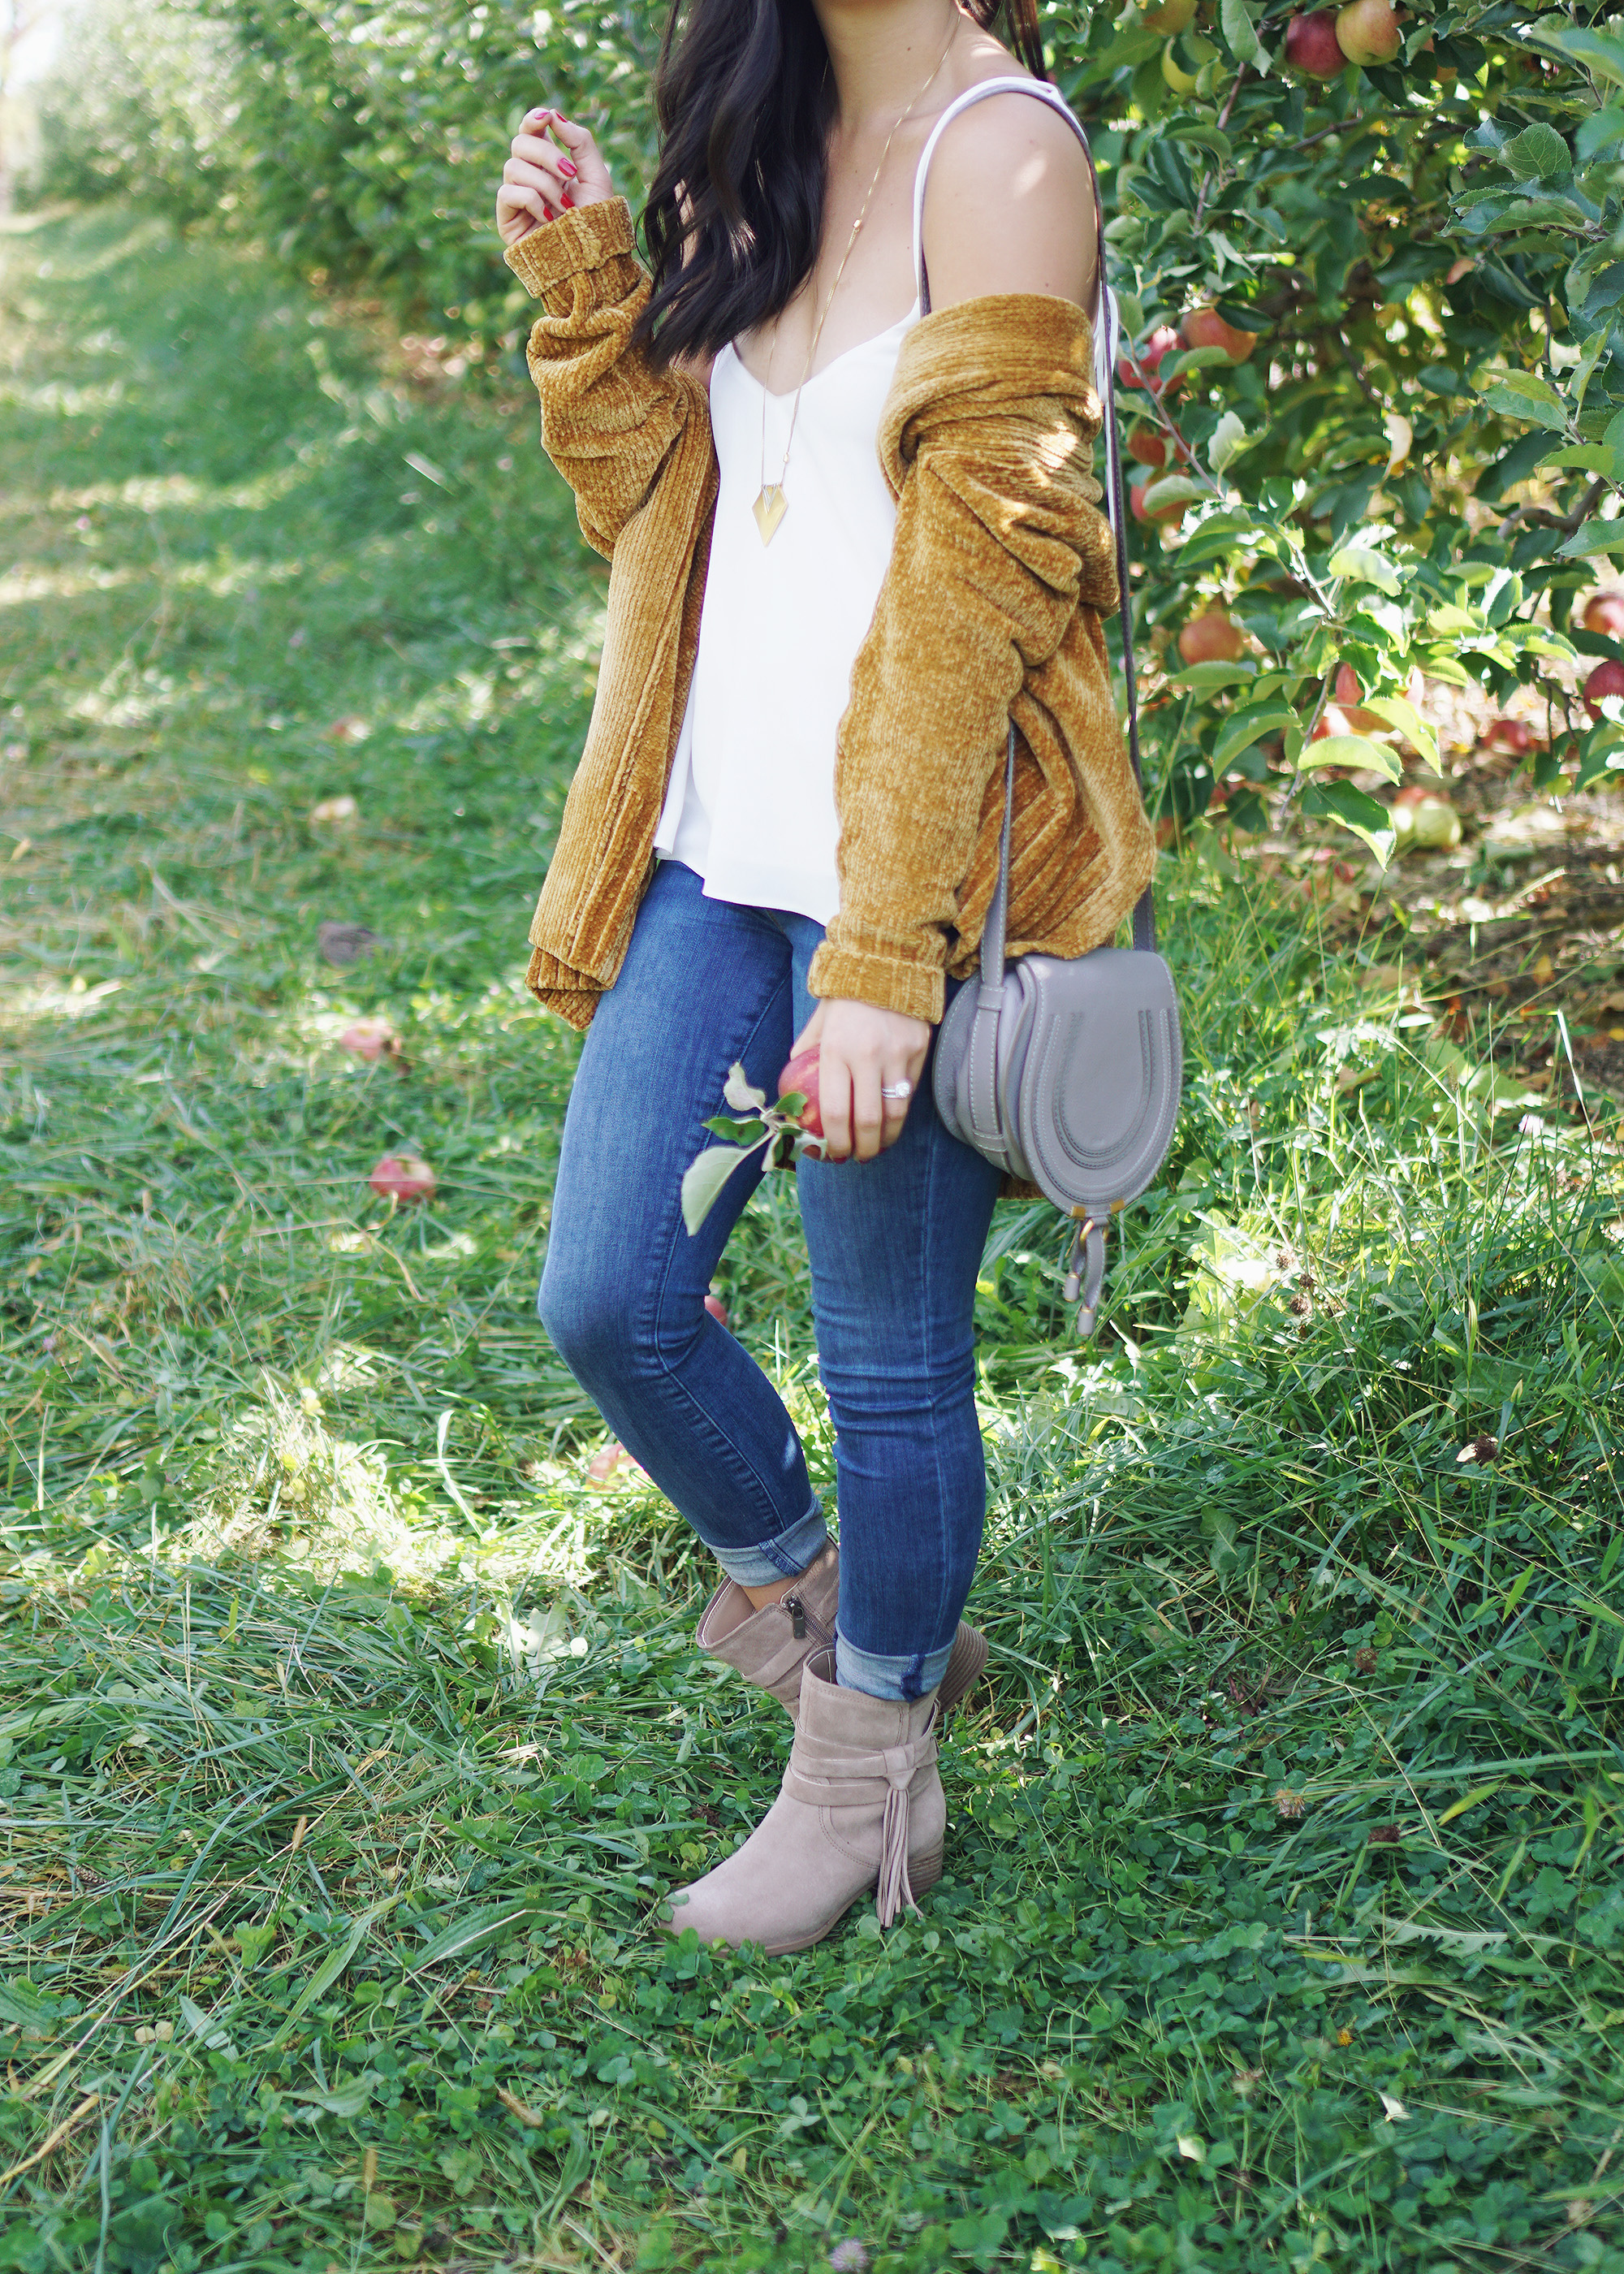 Fall Outfit Inspiration: Chenille Sweater & Skinny Jeans